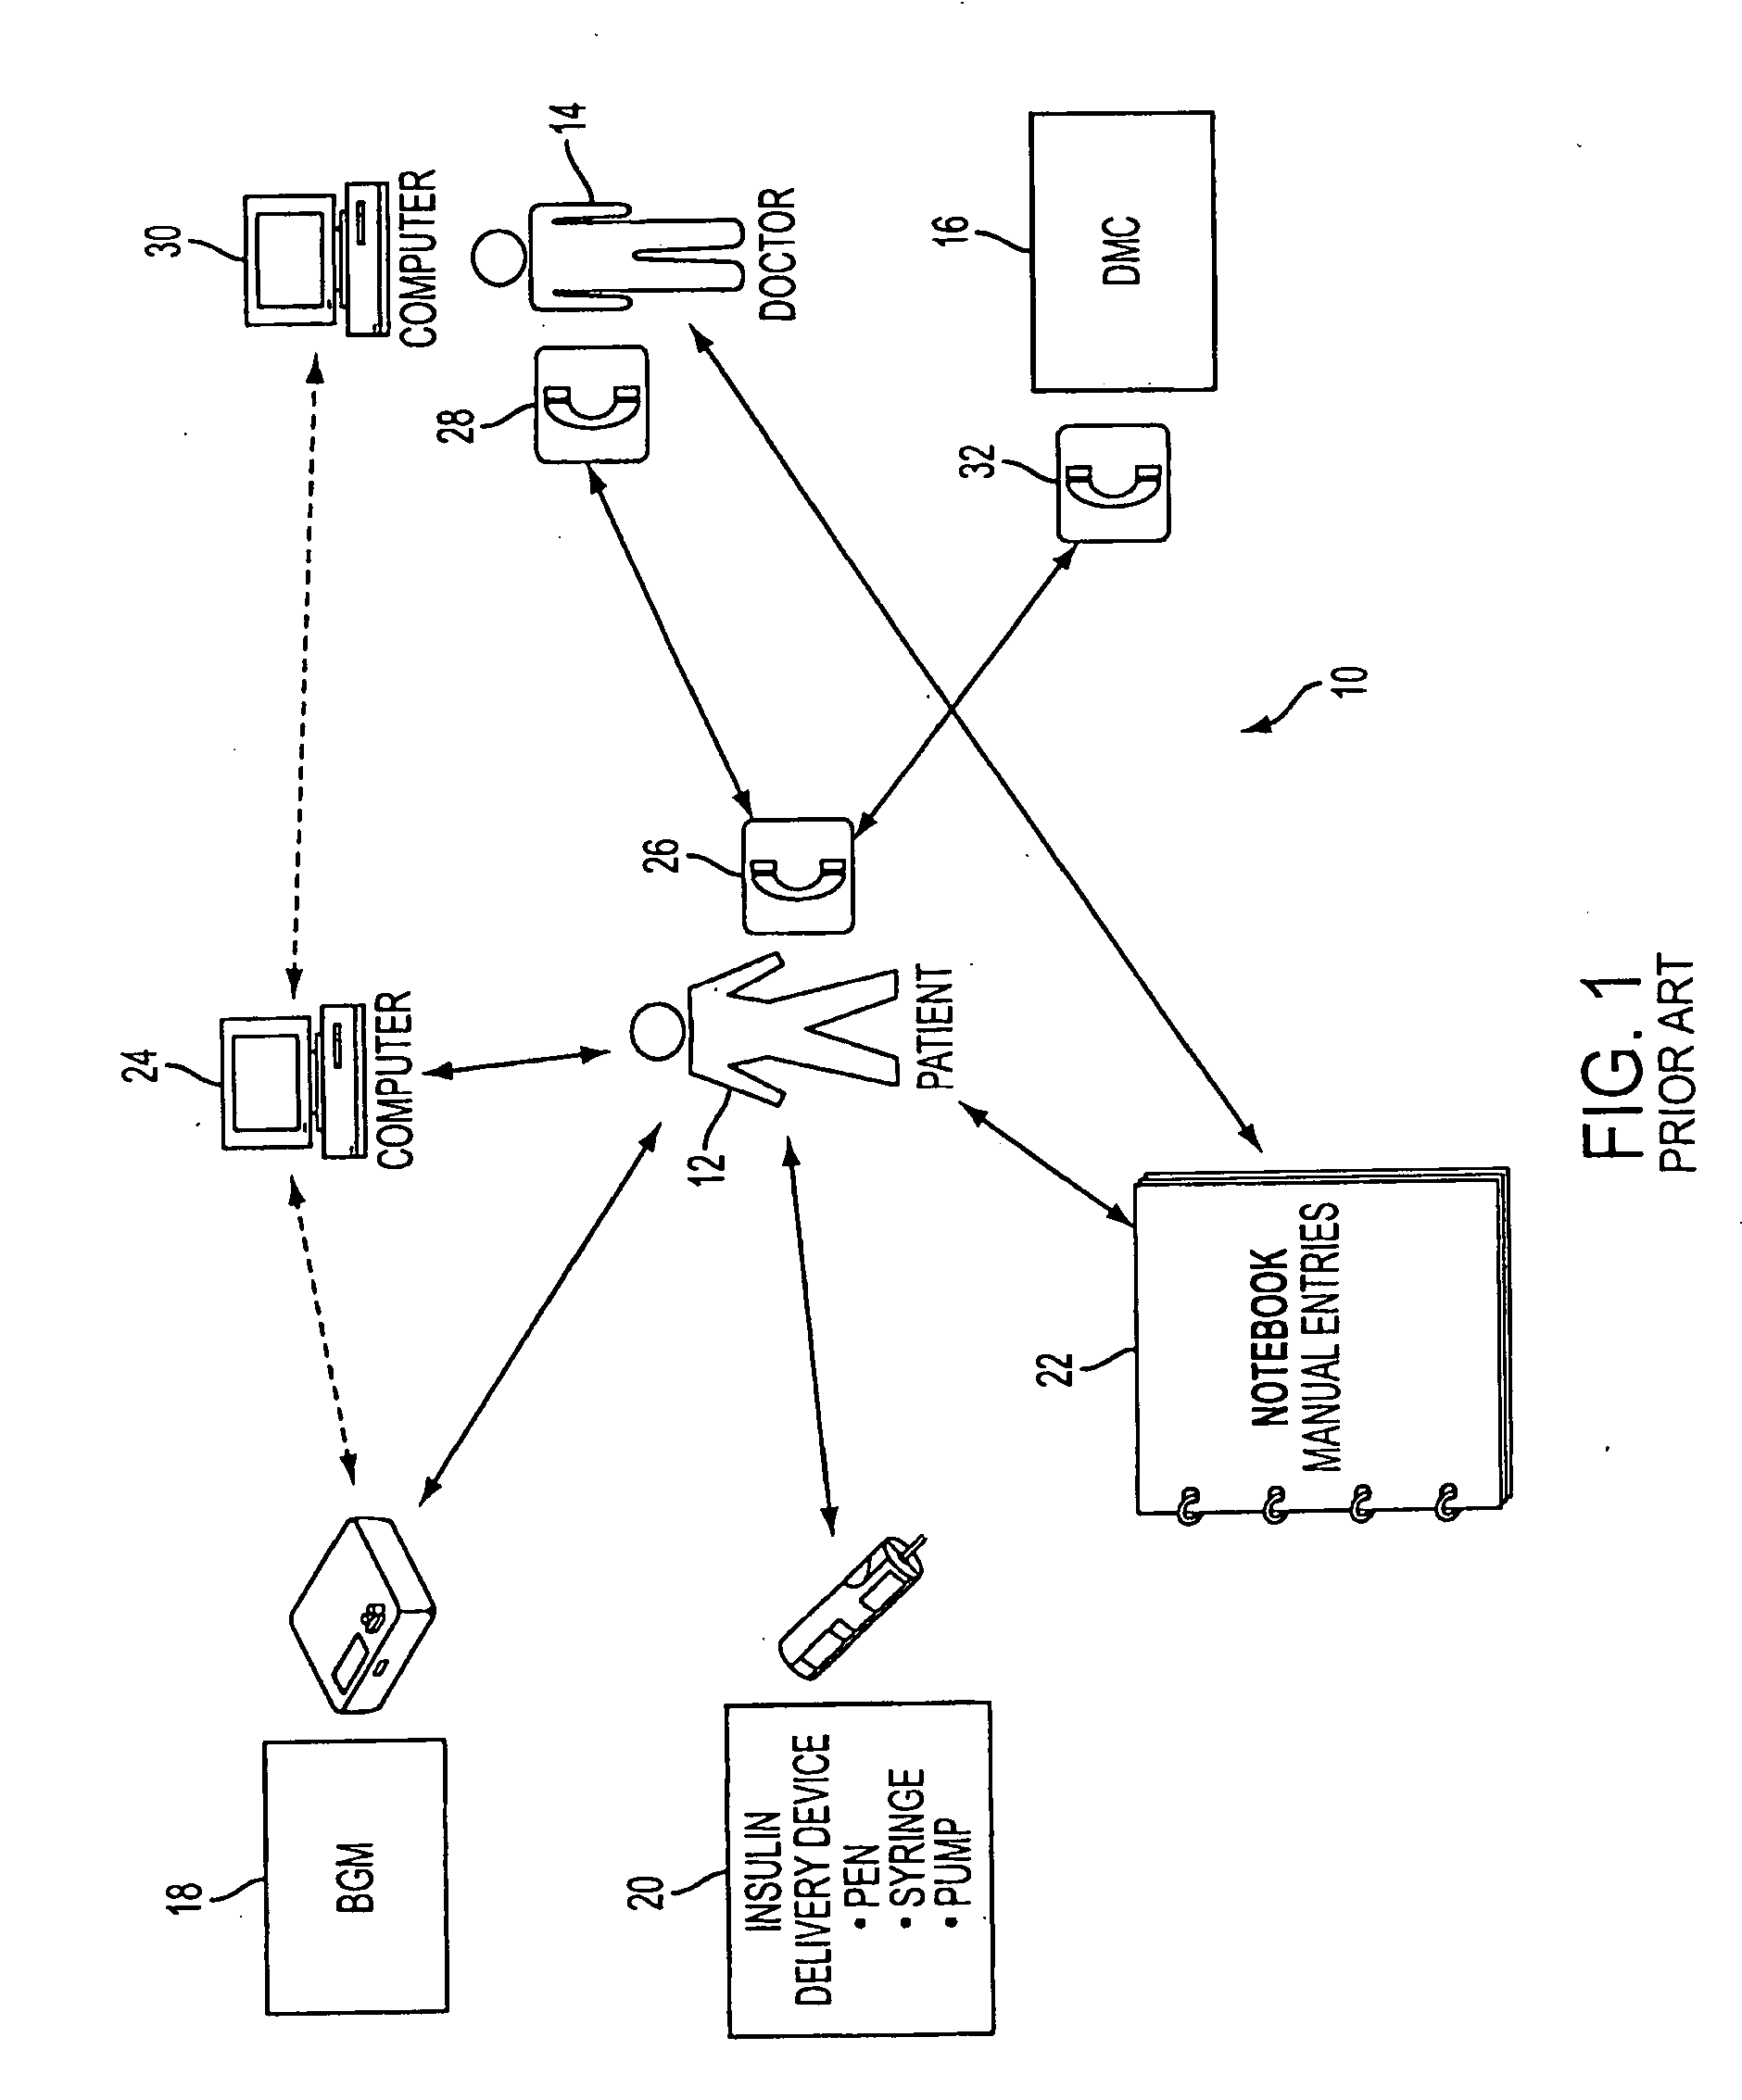 System and Methods for Improved Diabetes Data Management and Use Employing Wireless Connectivity Between Patients and Healthcare Providers and Repository of Diabetes Management Information